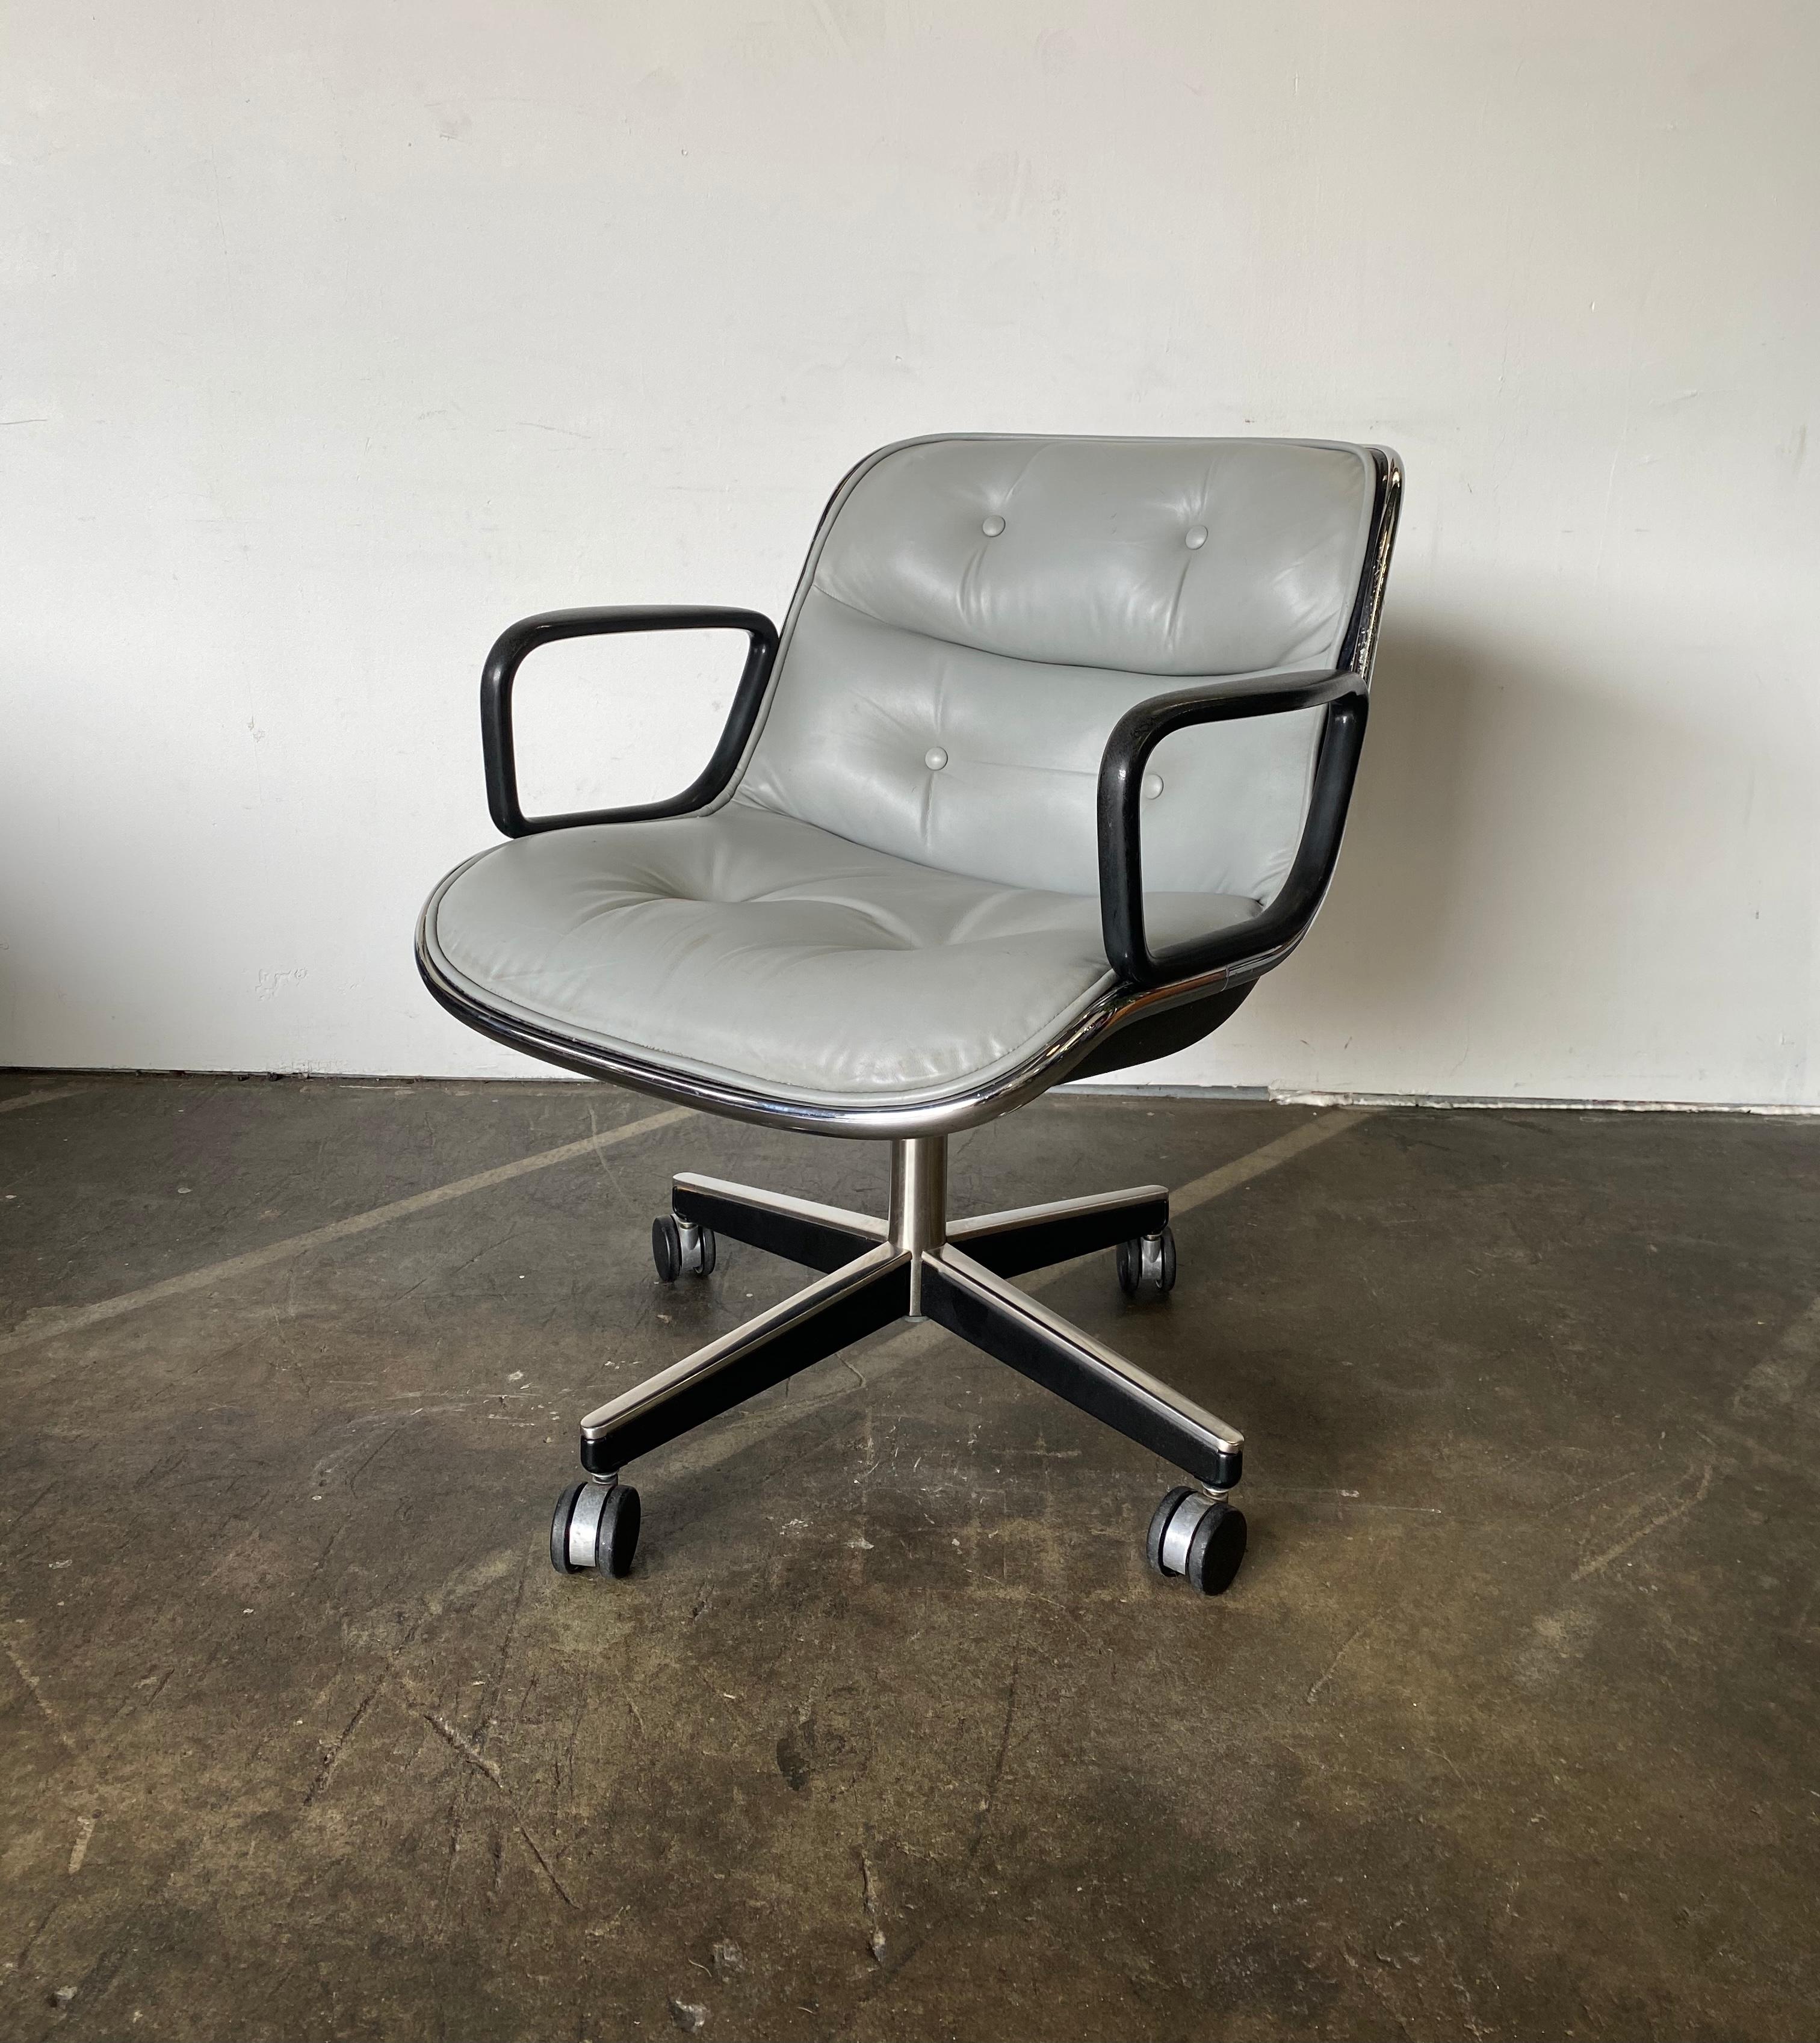 North American Charles Pollock Office/Desk Chair by Knoll